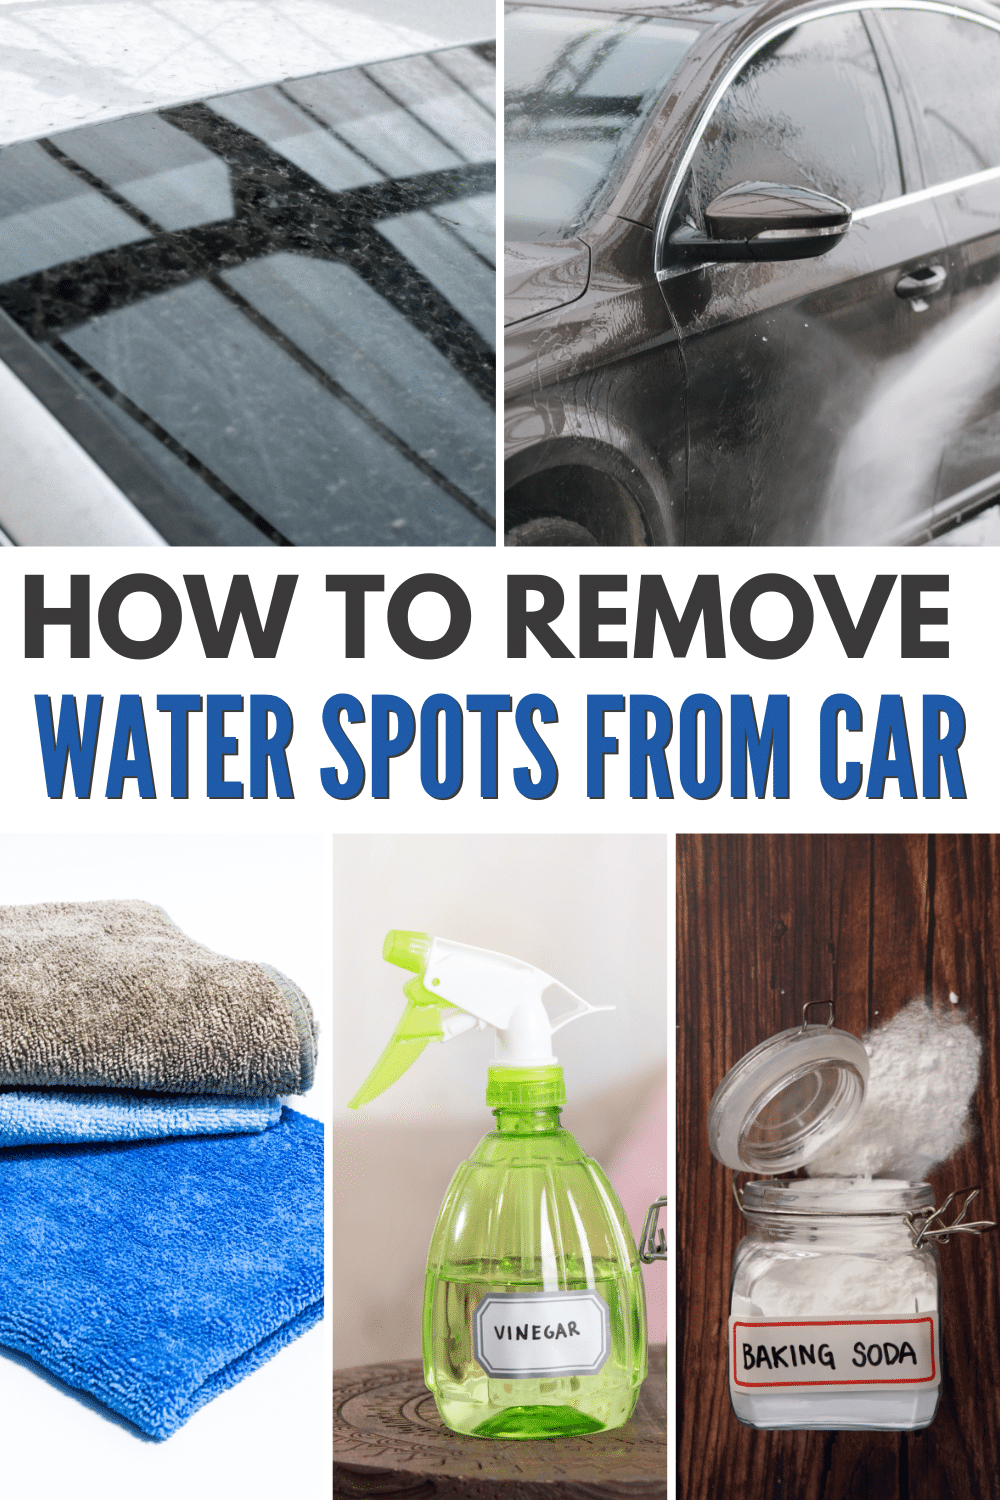 Discover effective techniques to remove water spots from your car.